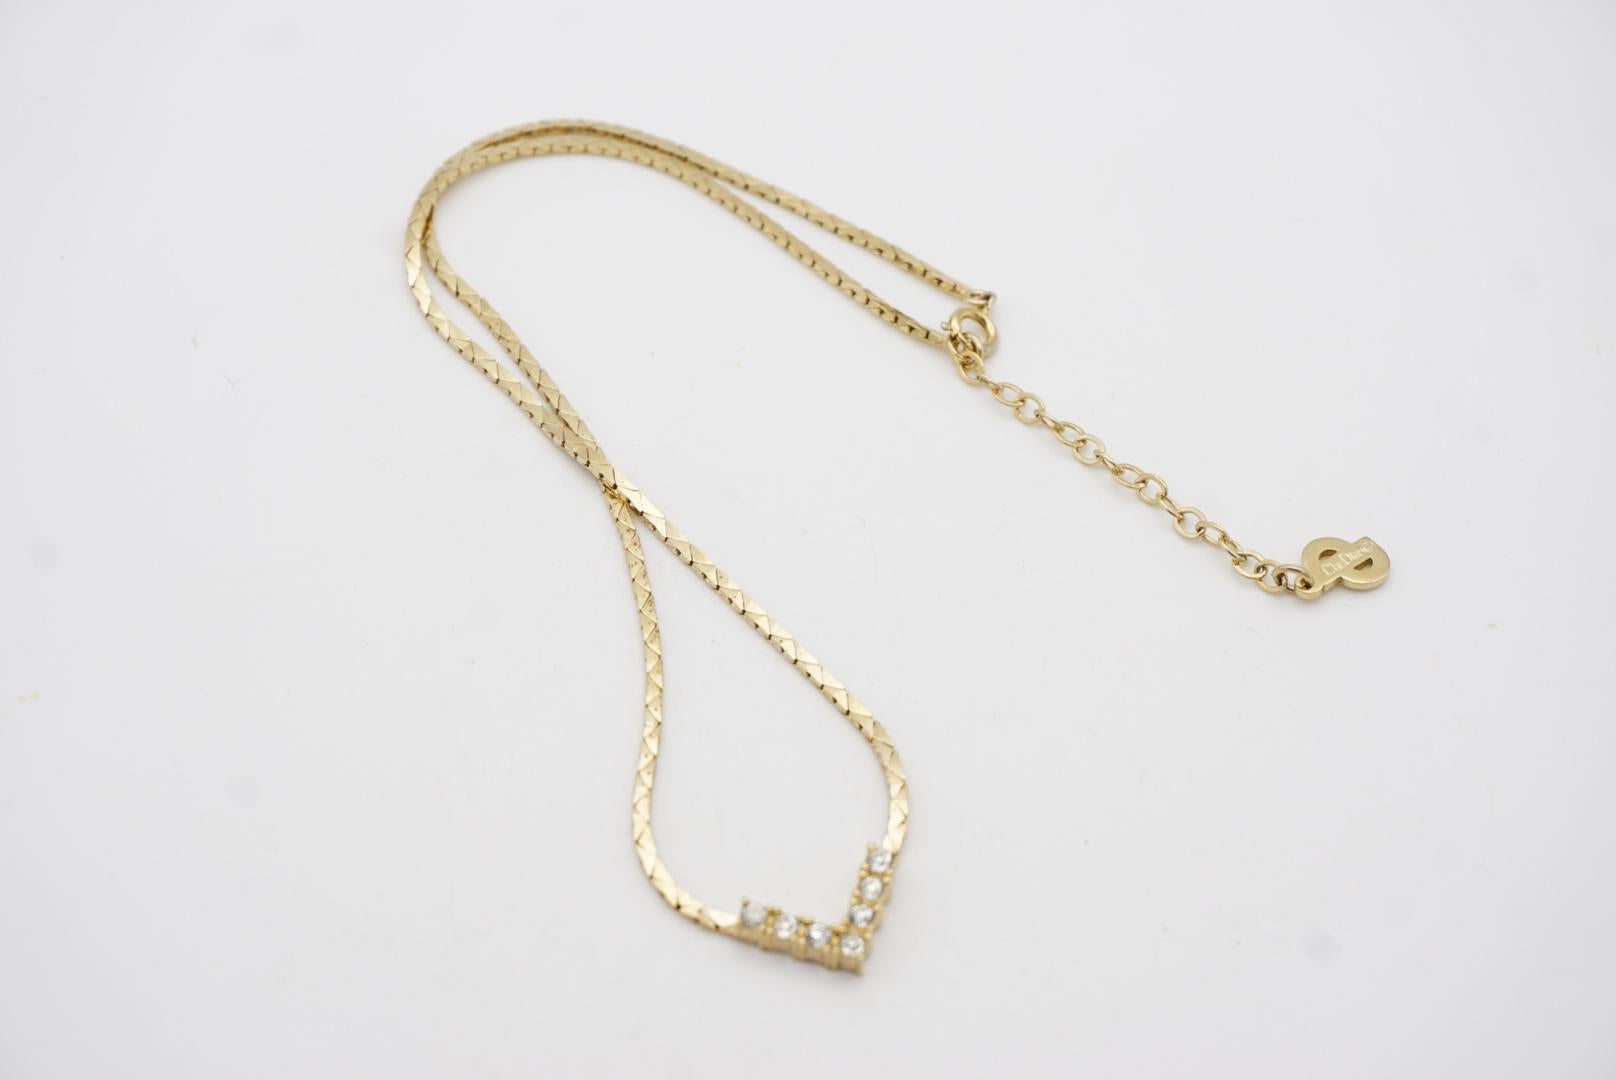 Christian Dior Vintage 1970s Swarovski Crystals Triangle Chain Pendant Necklace For Sale 8